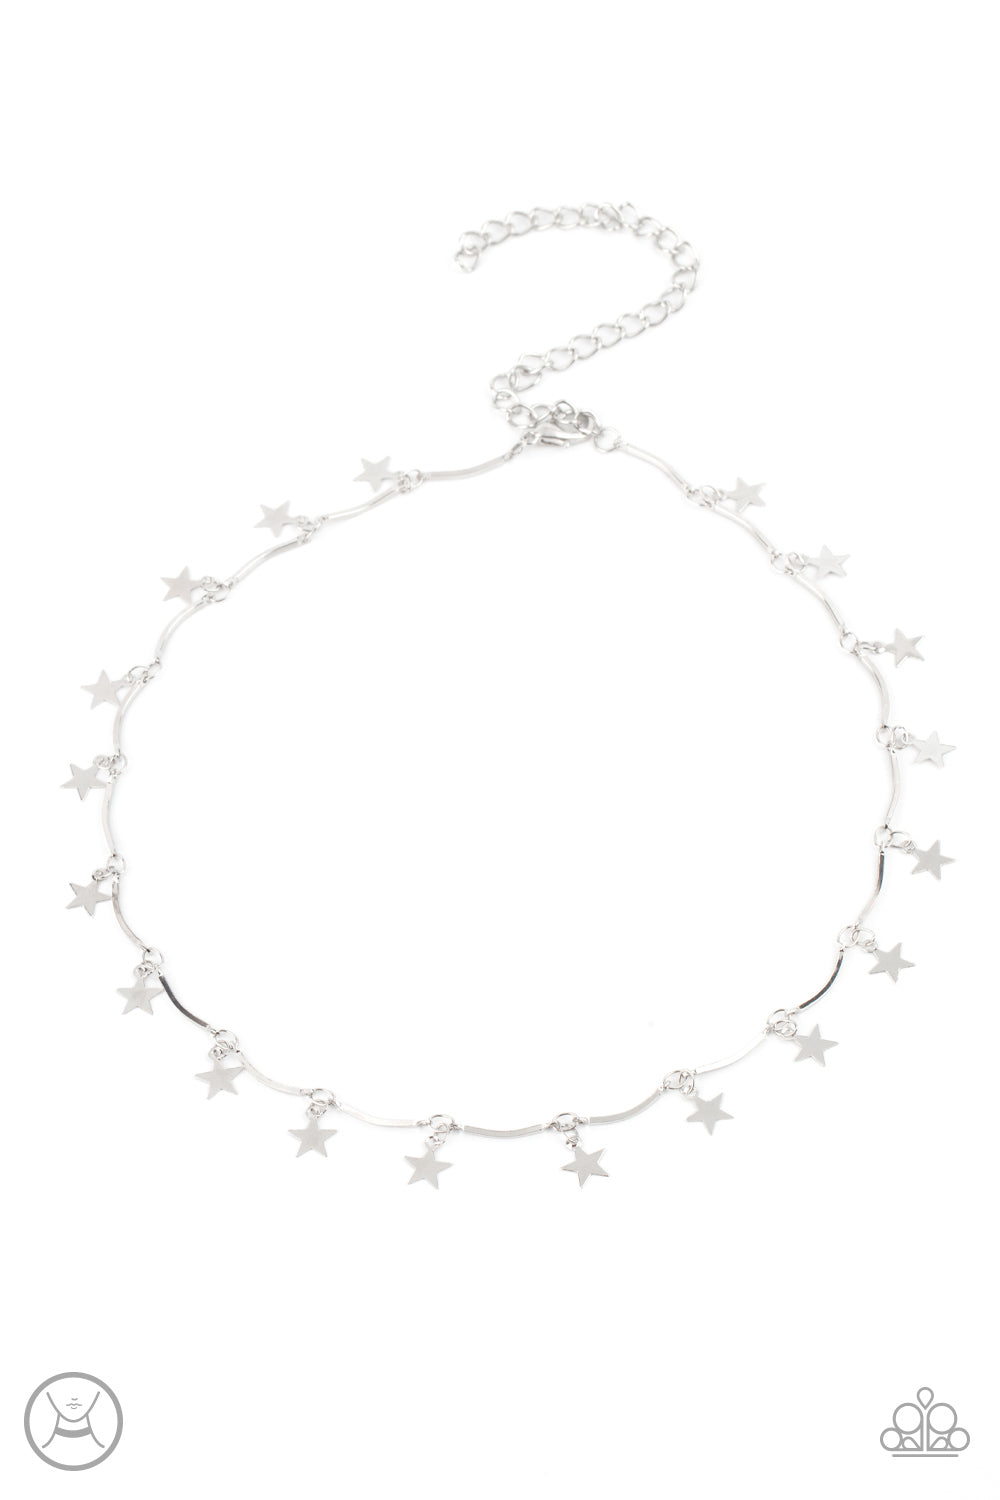 Little Miss Americana Silver Choker Necklace - Paparazzi Accessories  A collection of dainty silver stars and curved silver bars delicately connect around the neck, creating a stellar fringe. Features an adjustable clasp closure.  All Paparazzi Accessories are lead free and nickel free!  Sold as one individual necklace. Includes one pair of matching earrings. Get The Complete Look! Bracelet: "Party in the USA - Silver" (Sold Separately)